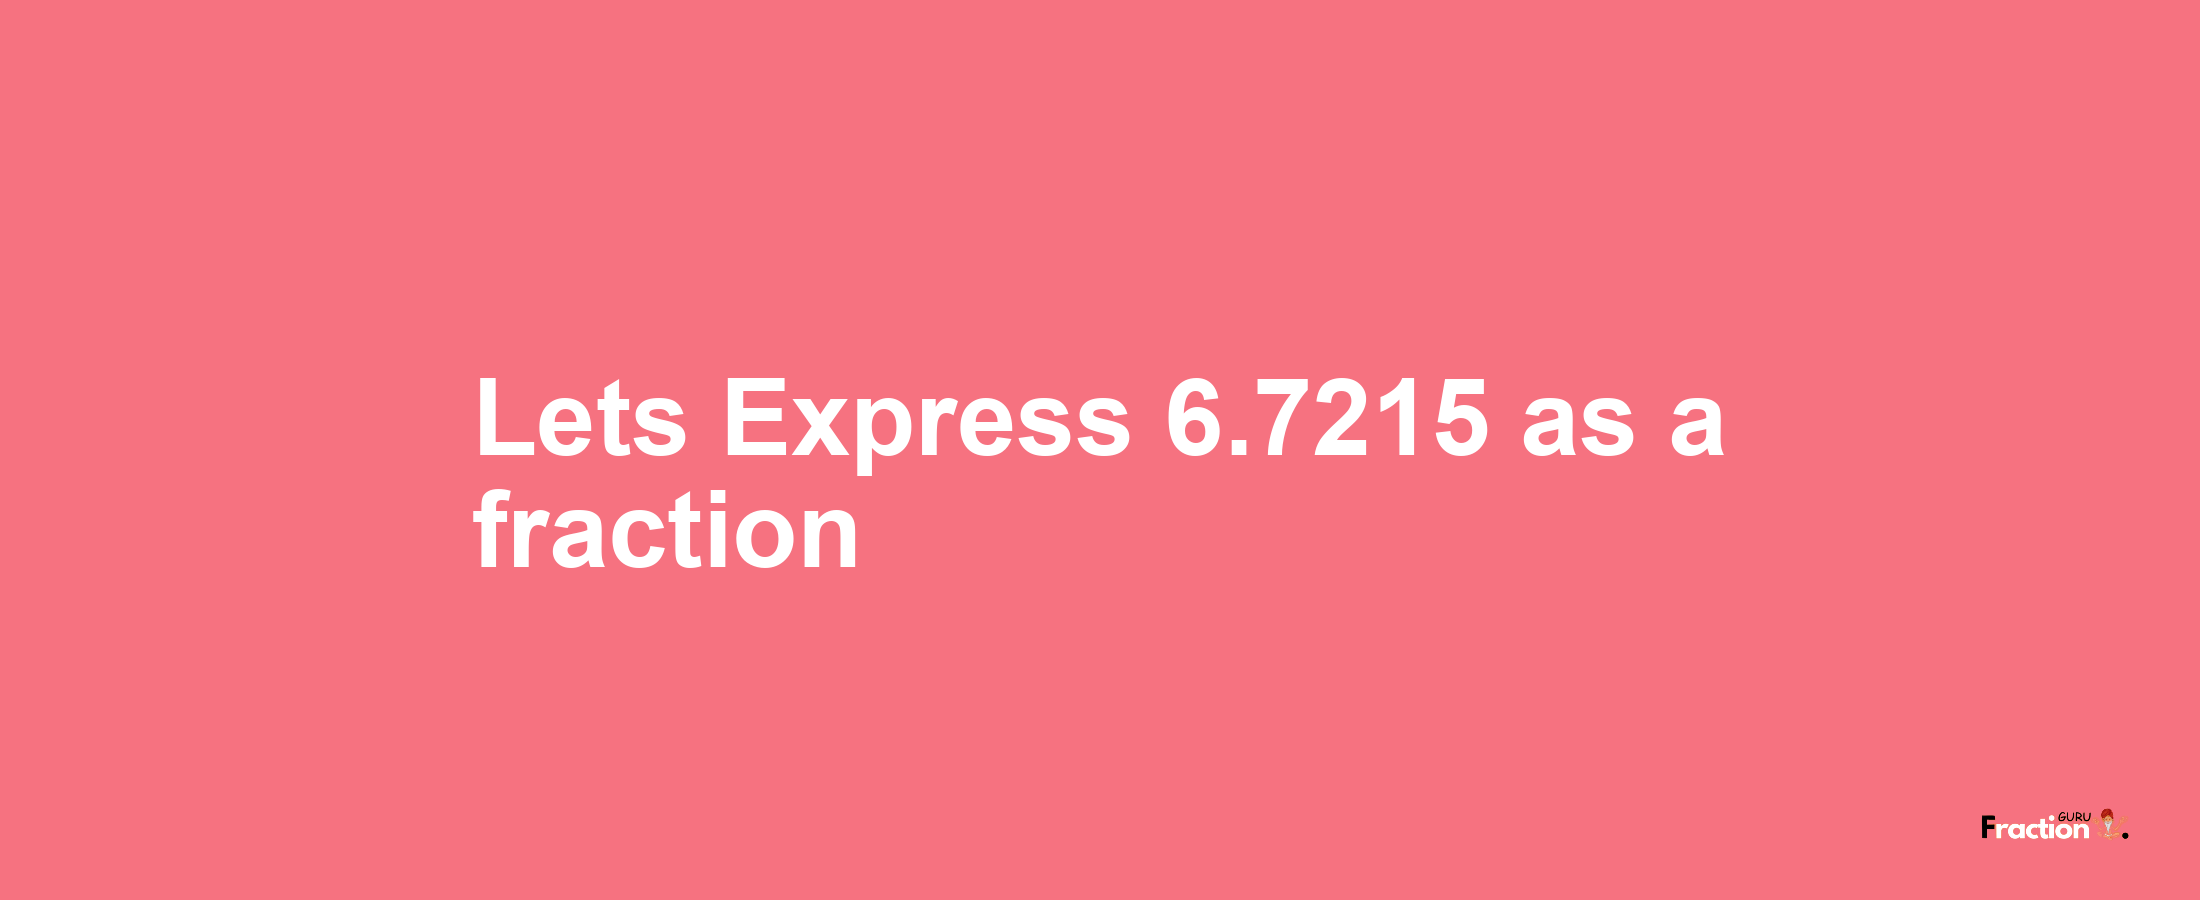 Lets Express 6.7215 as afraction